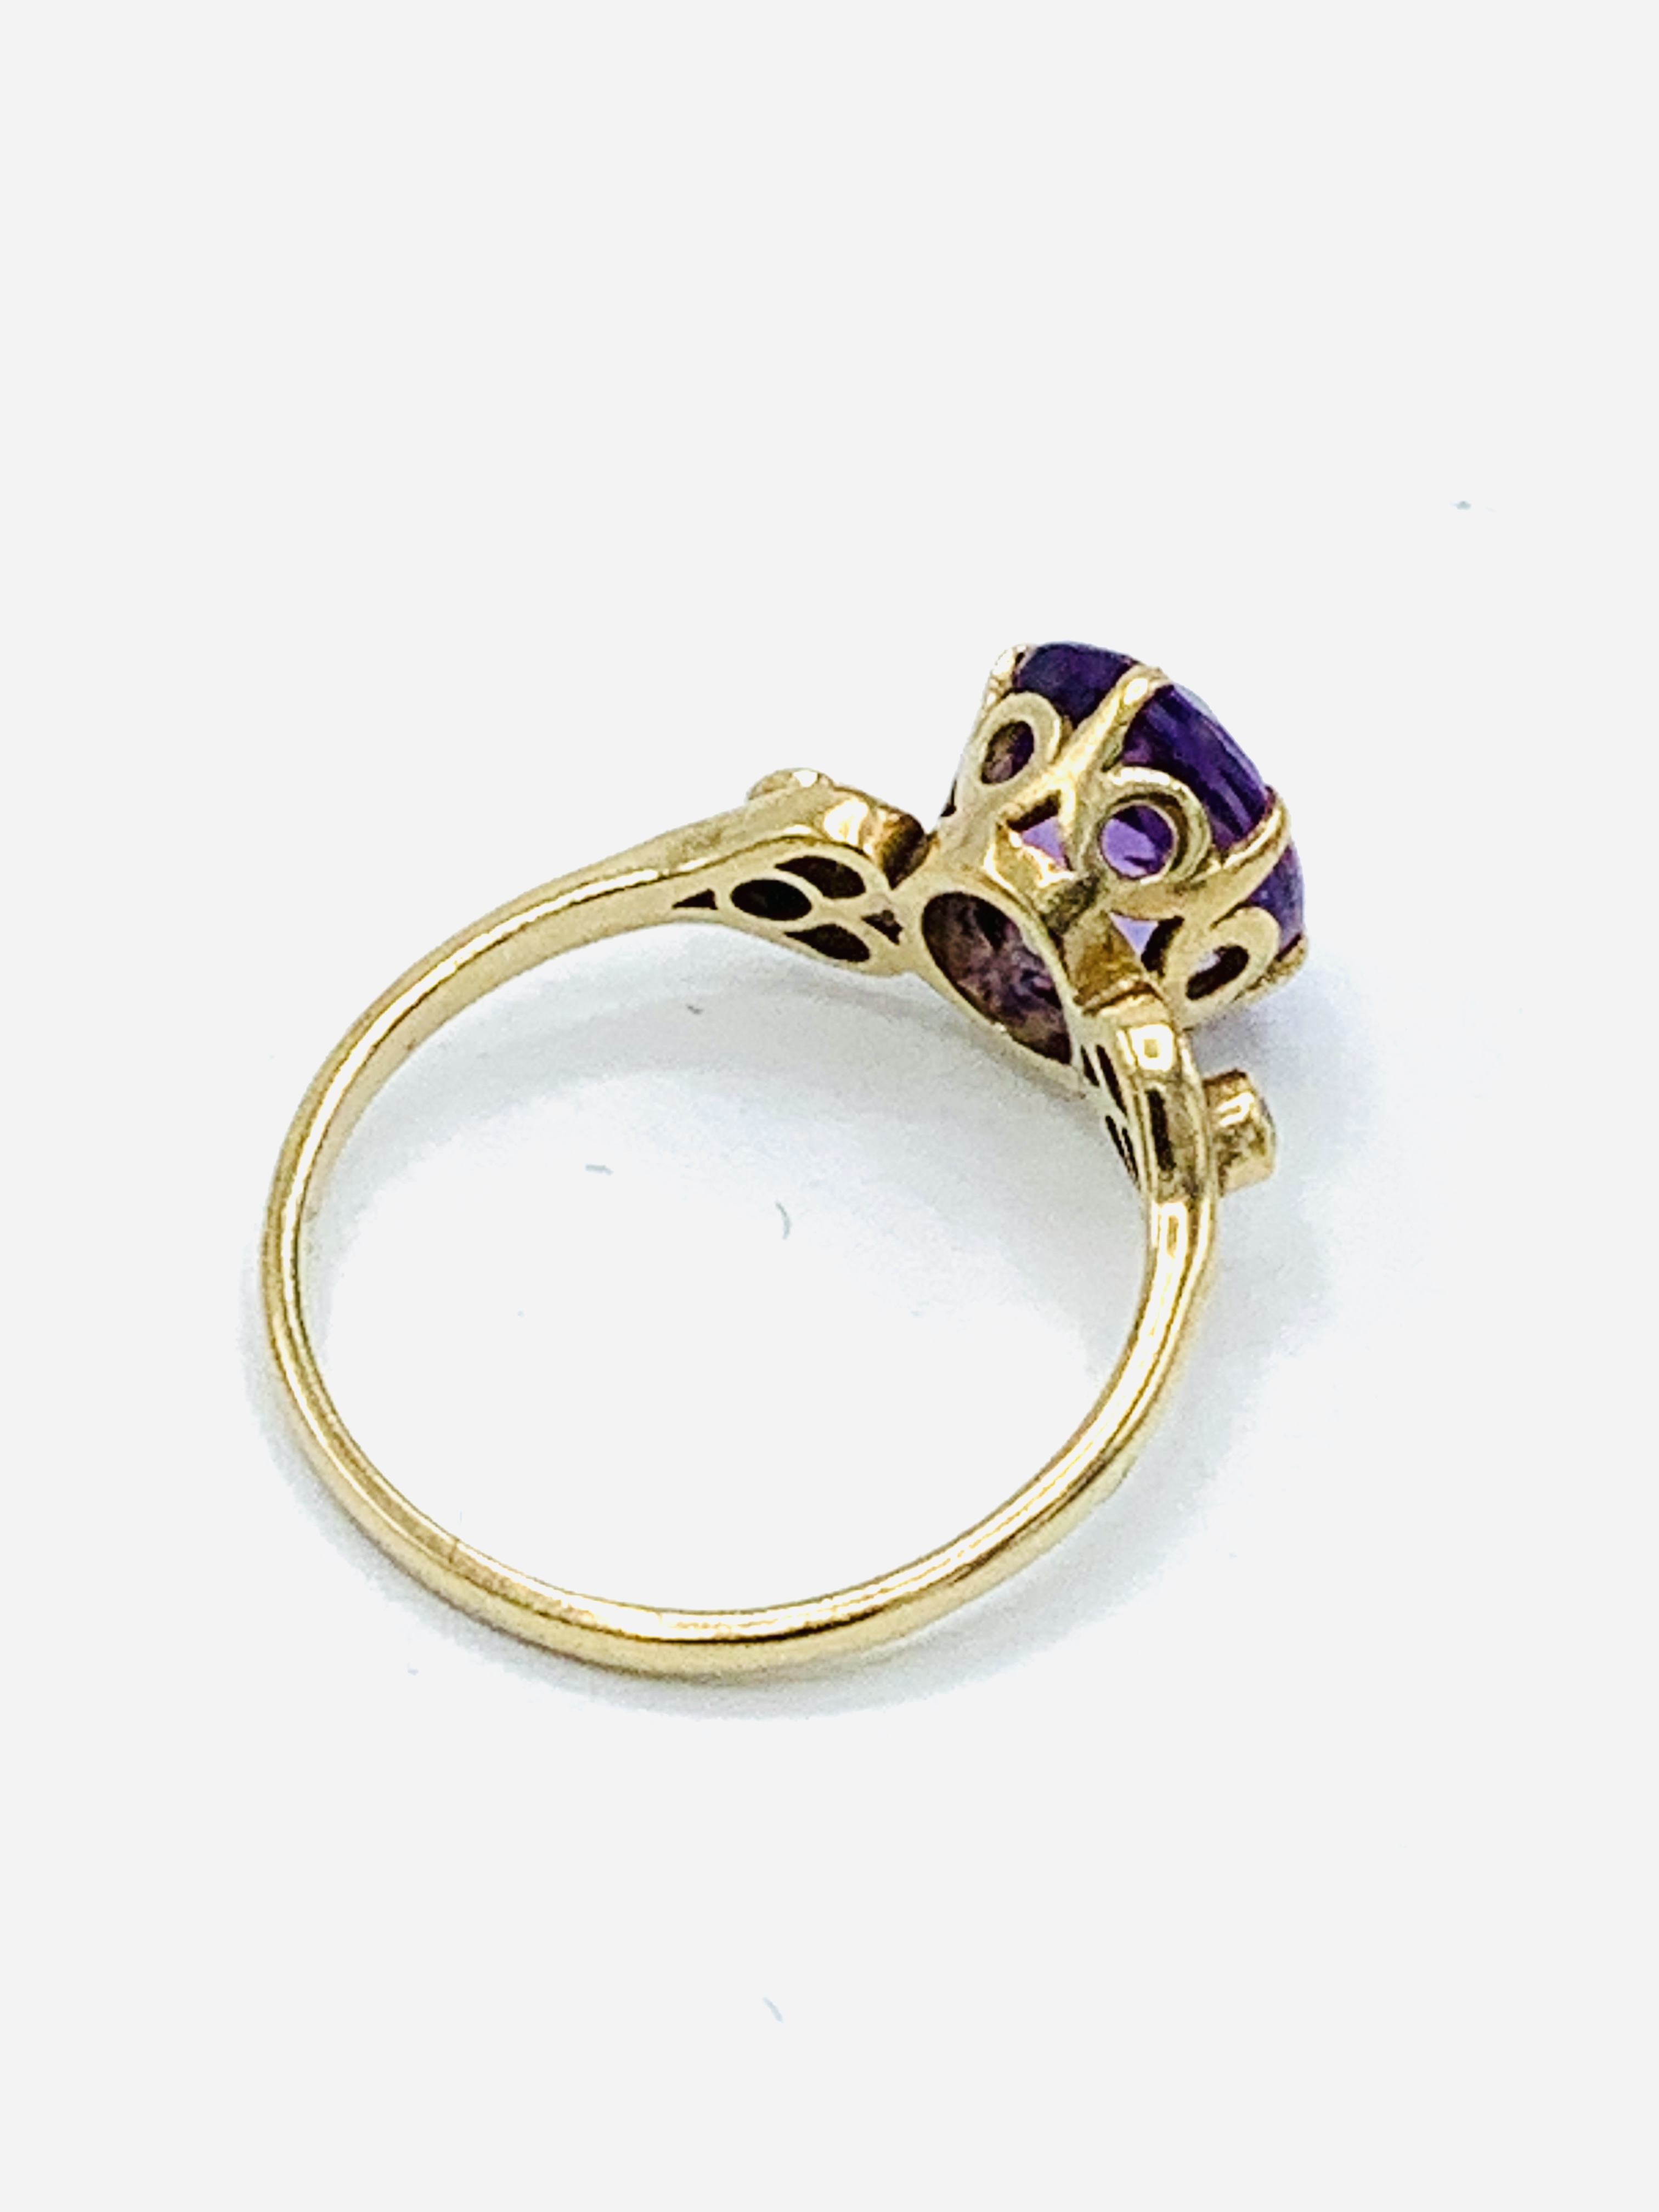 9ct gold amethyst and diamond ring. - Image 3 of 3